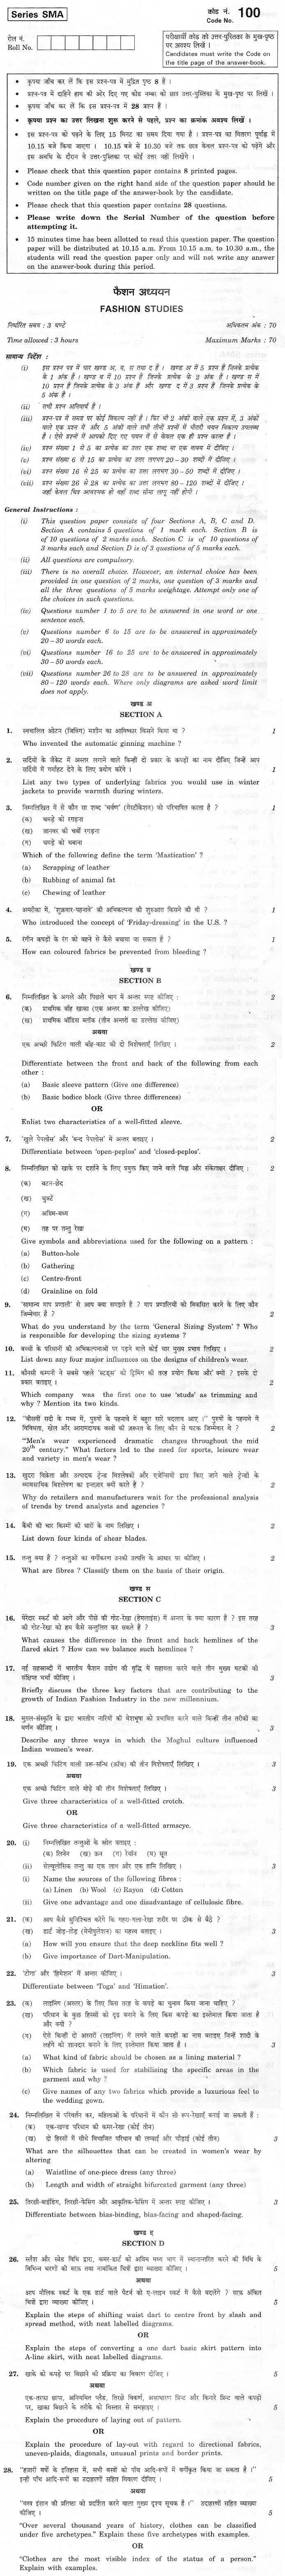 CBSE Class XII Previous Year Question Paper 2012 Fashion Studies